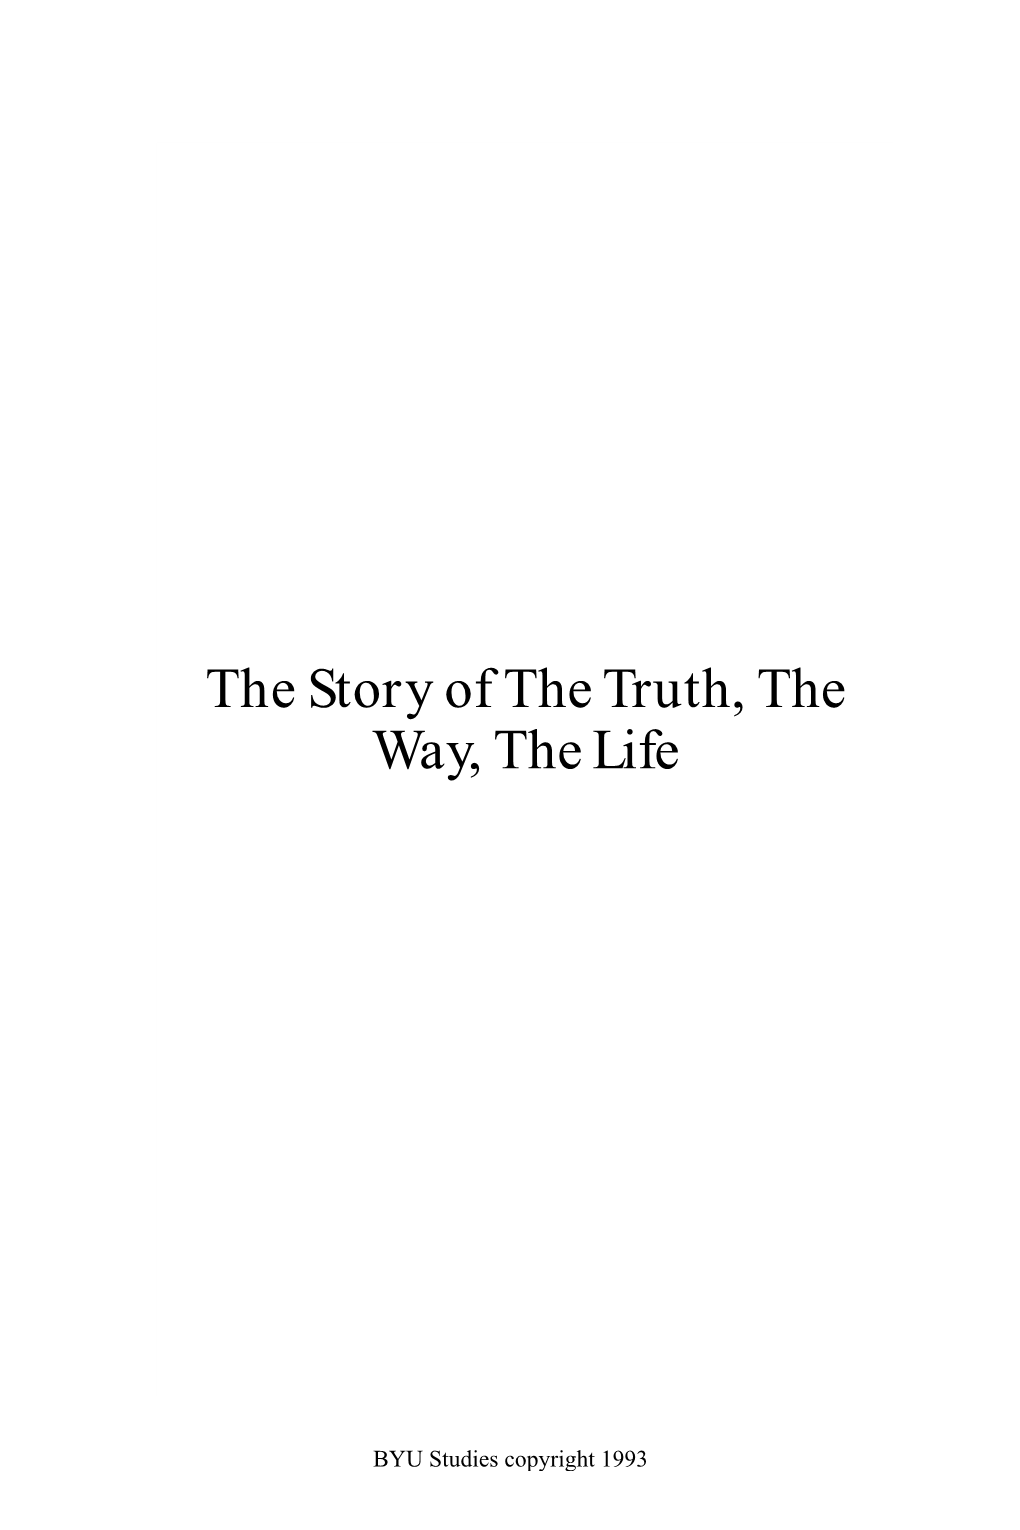 The Story of the Truth, the Way, the Life